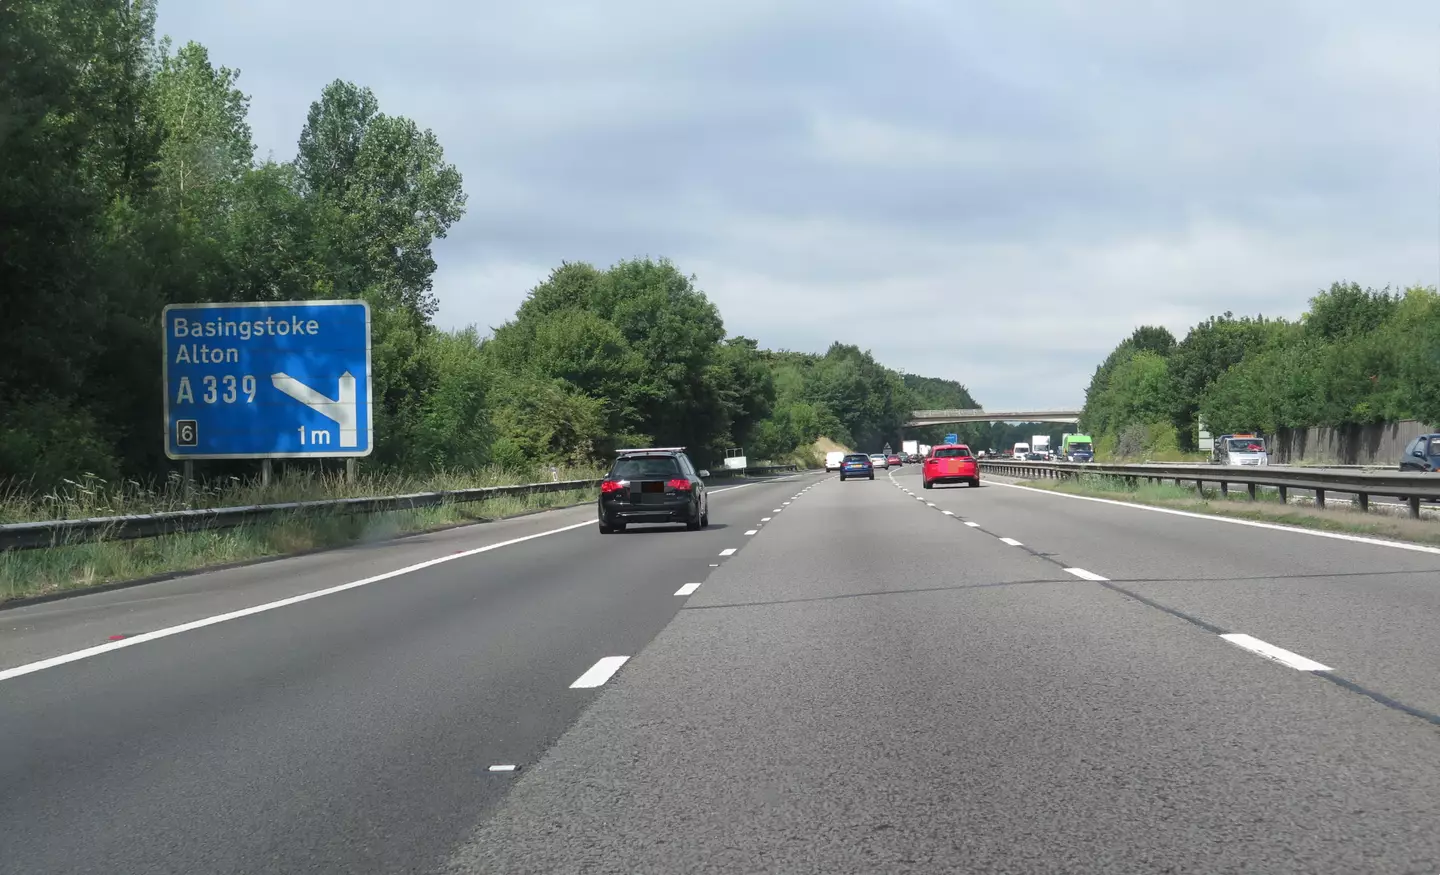 Learners are perfectly entitled to have lessons on the motorway.